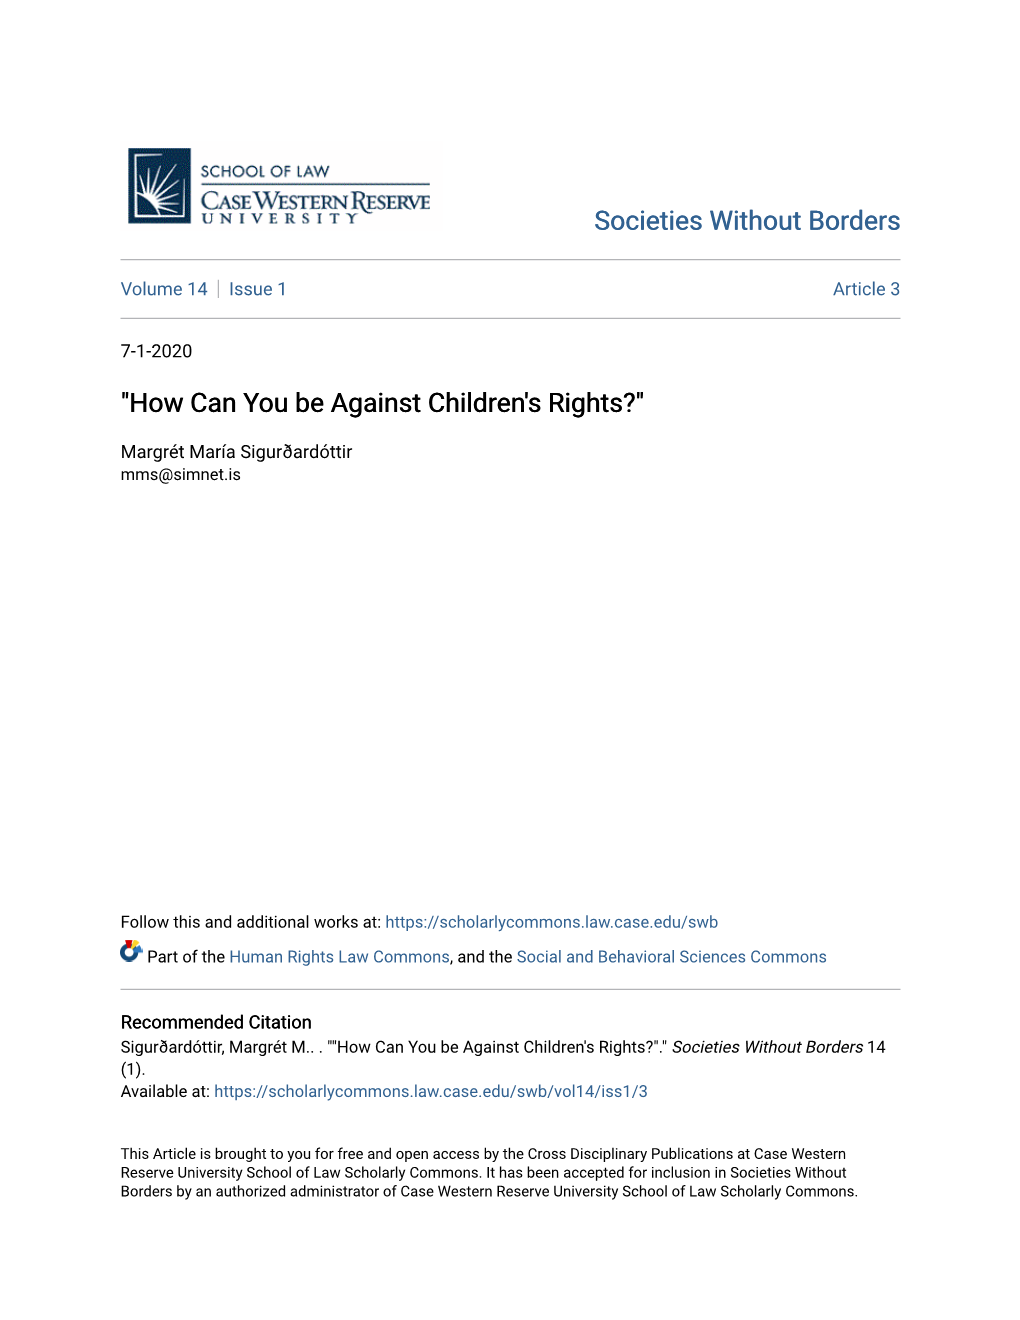 "How Can You Be Against Children's Rights?"